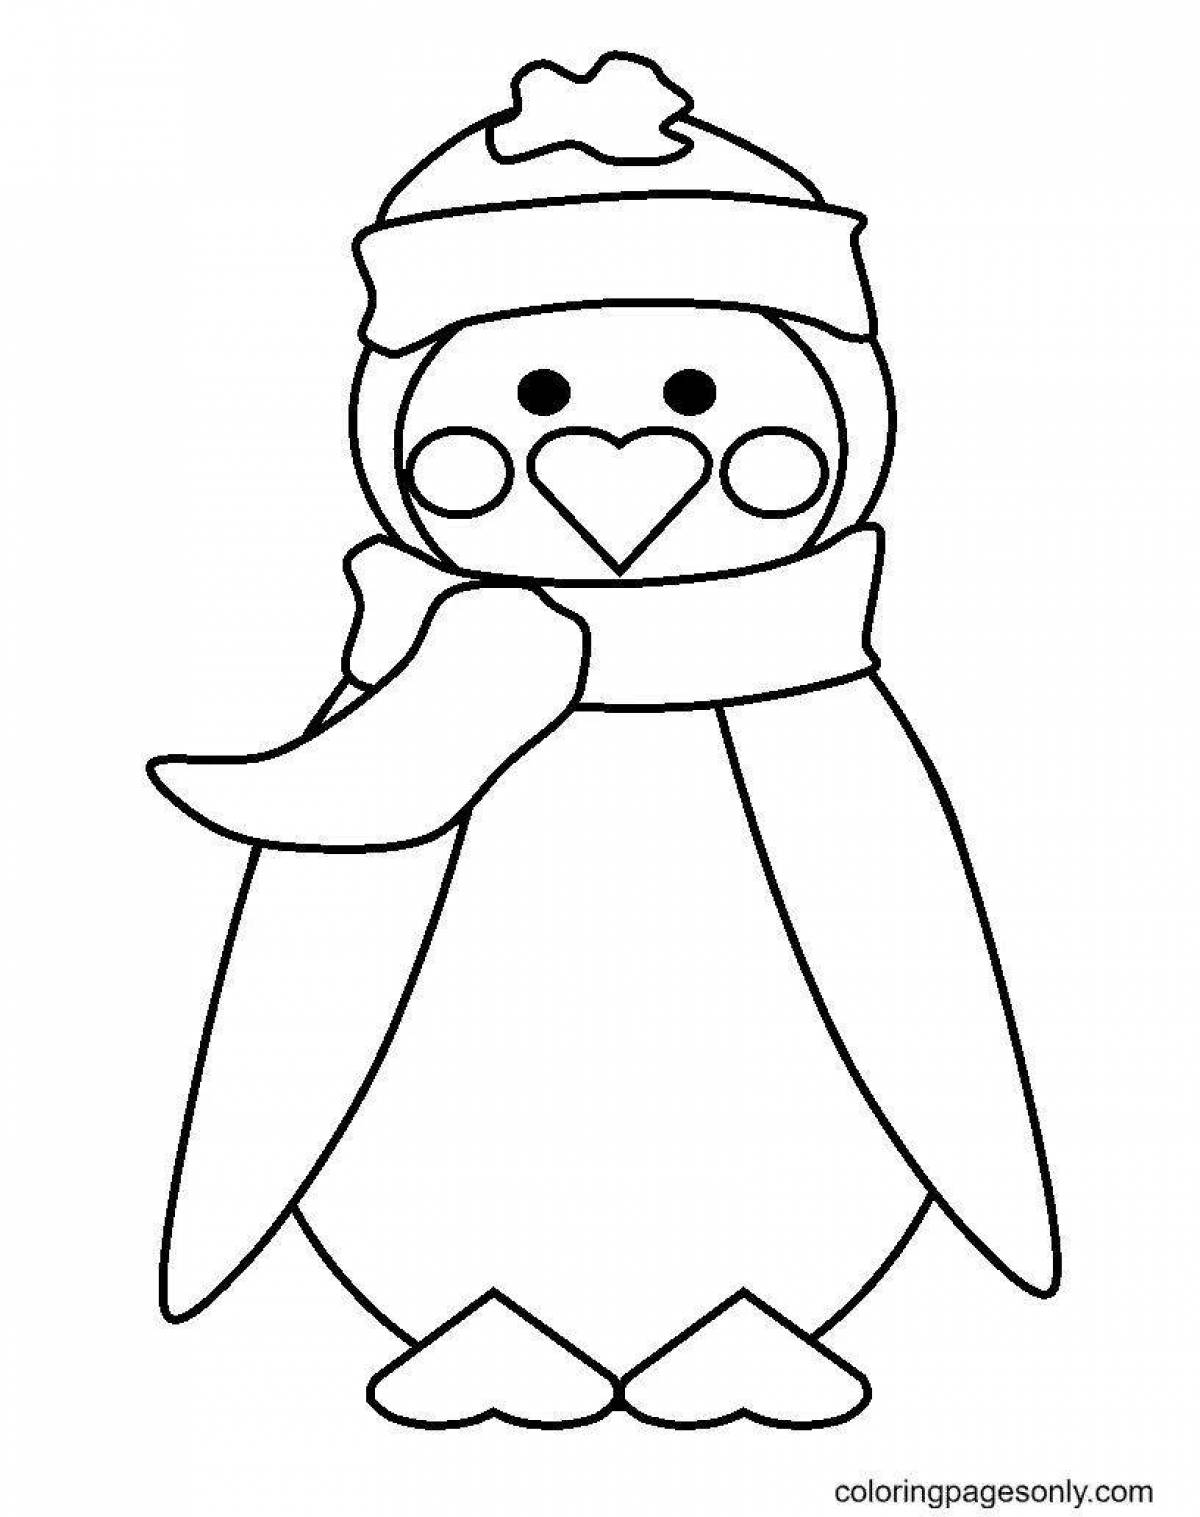 Rampant penguin coloring page